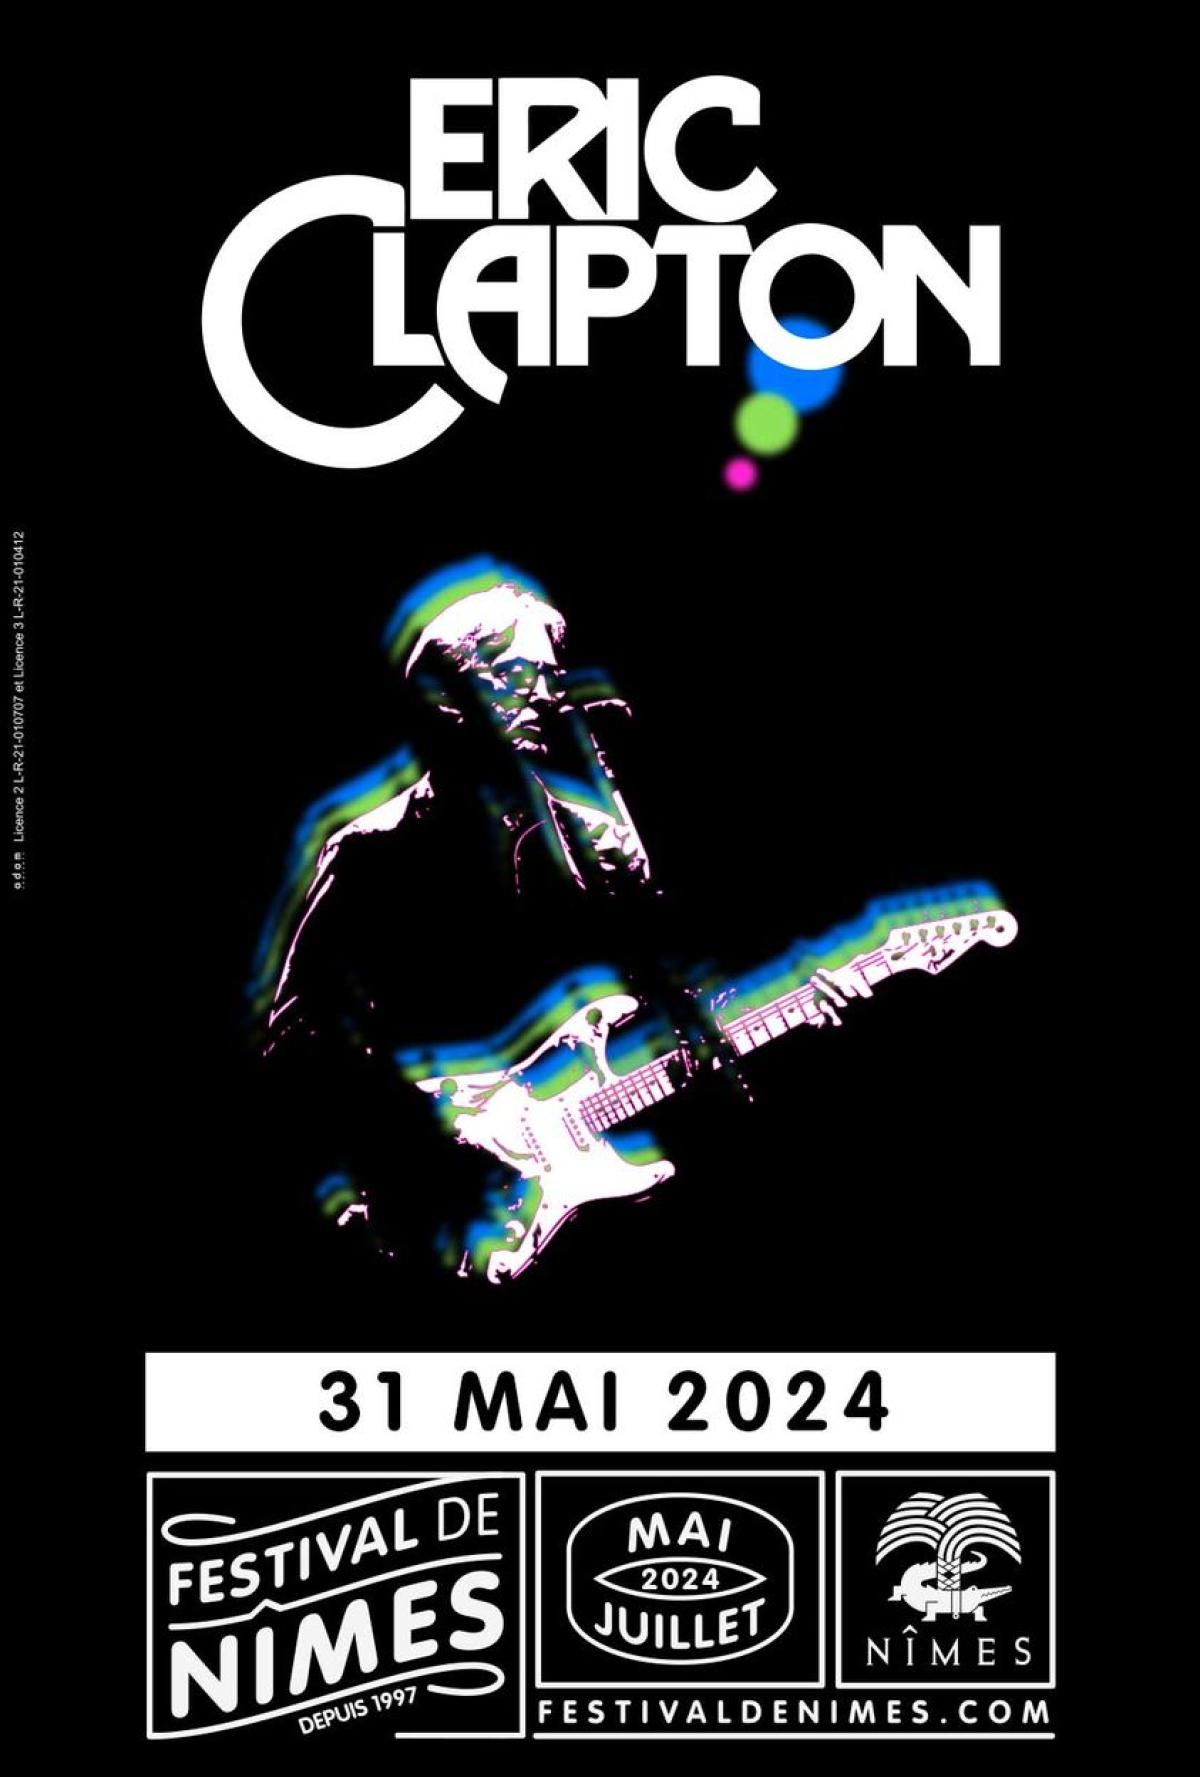 Eric Clapton at Arenes de Nimes Tickets